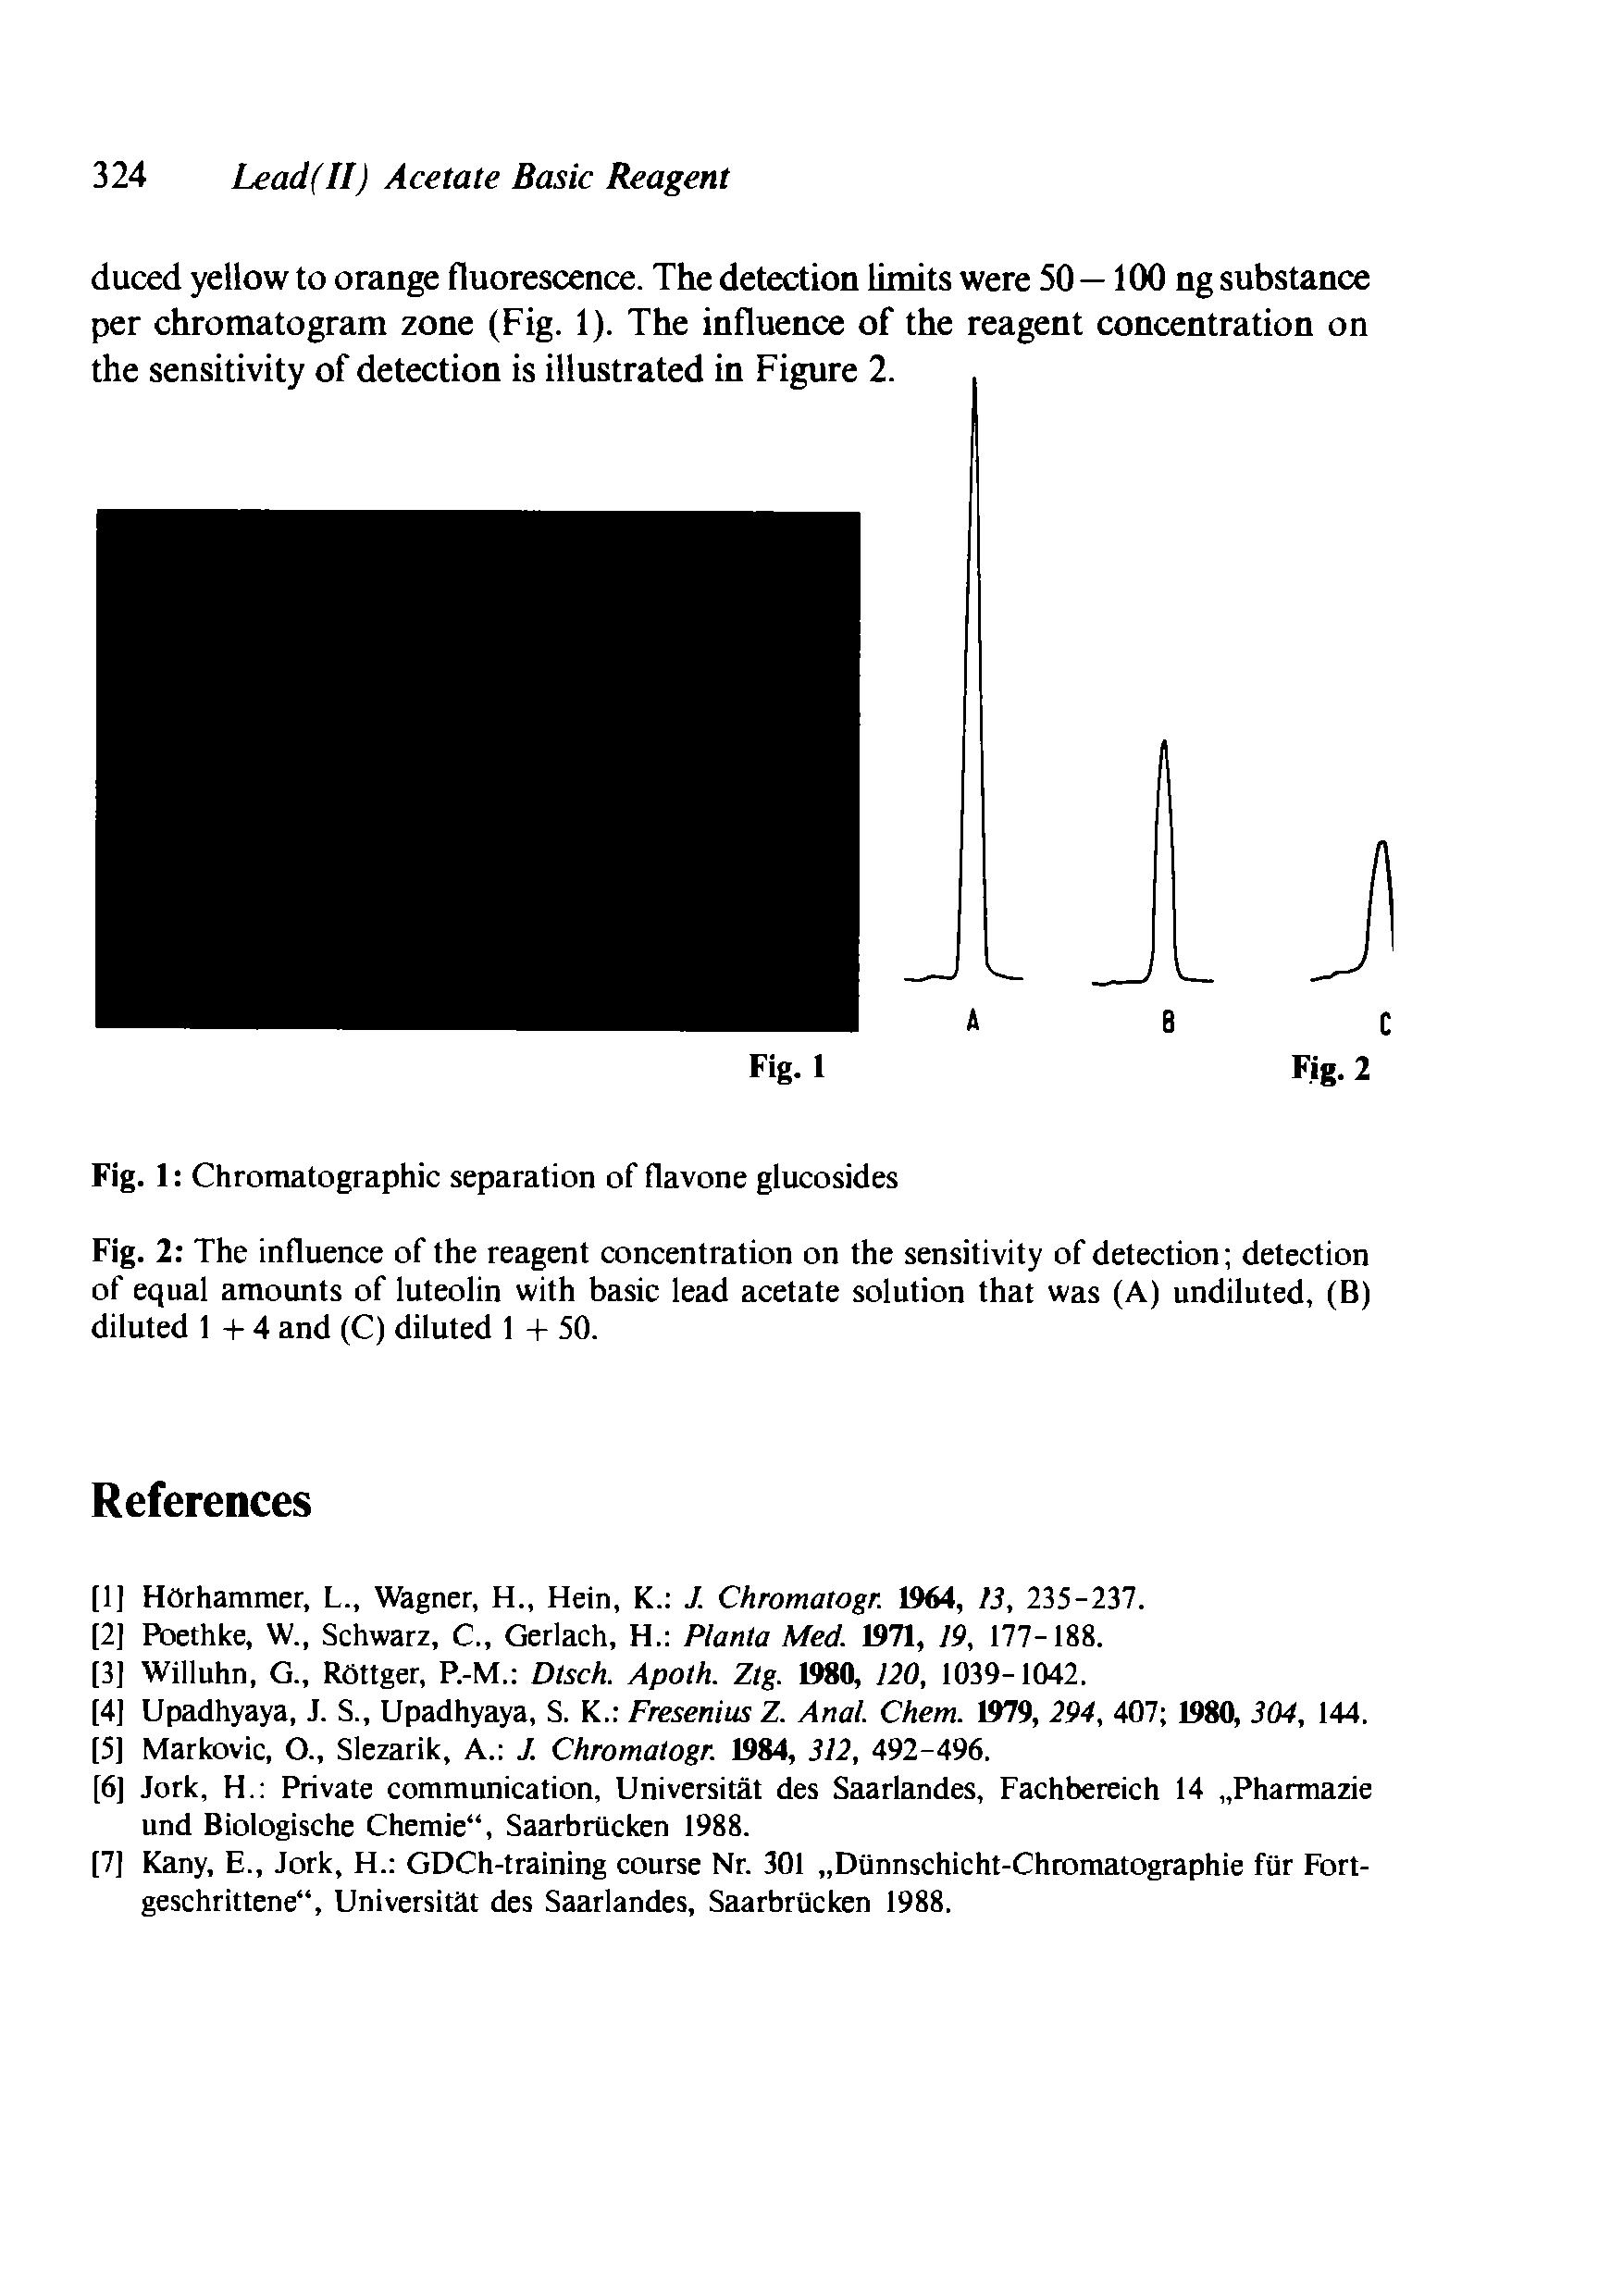 Fig. 2 The influence of the reagent concentration on the sensitivity of detection detection of equal amounts of luteolin with basic lead acetate solution that was (A) undiluted, (B) diluted 1 + 4 and (C) diluted 1 + 50.